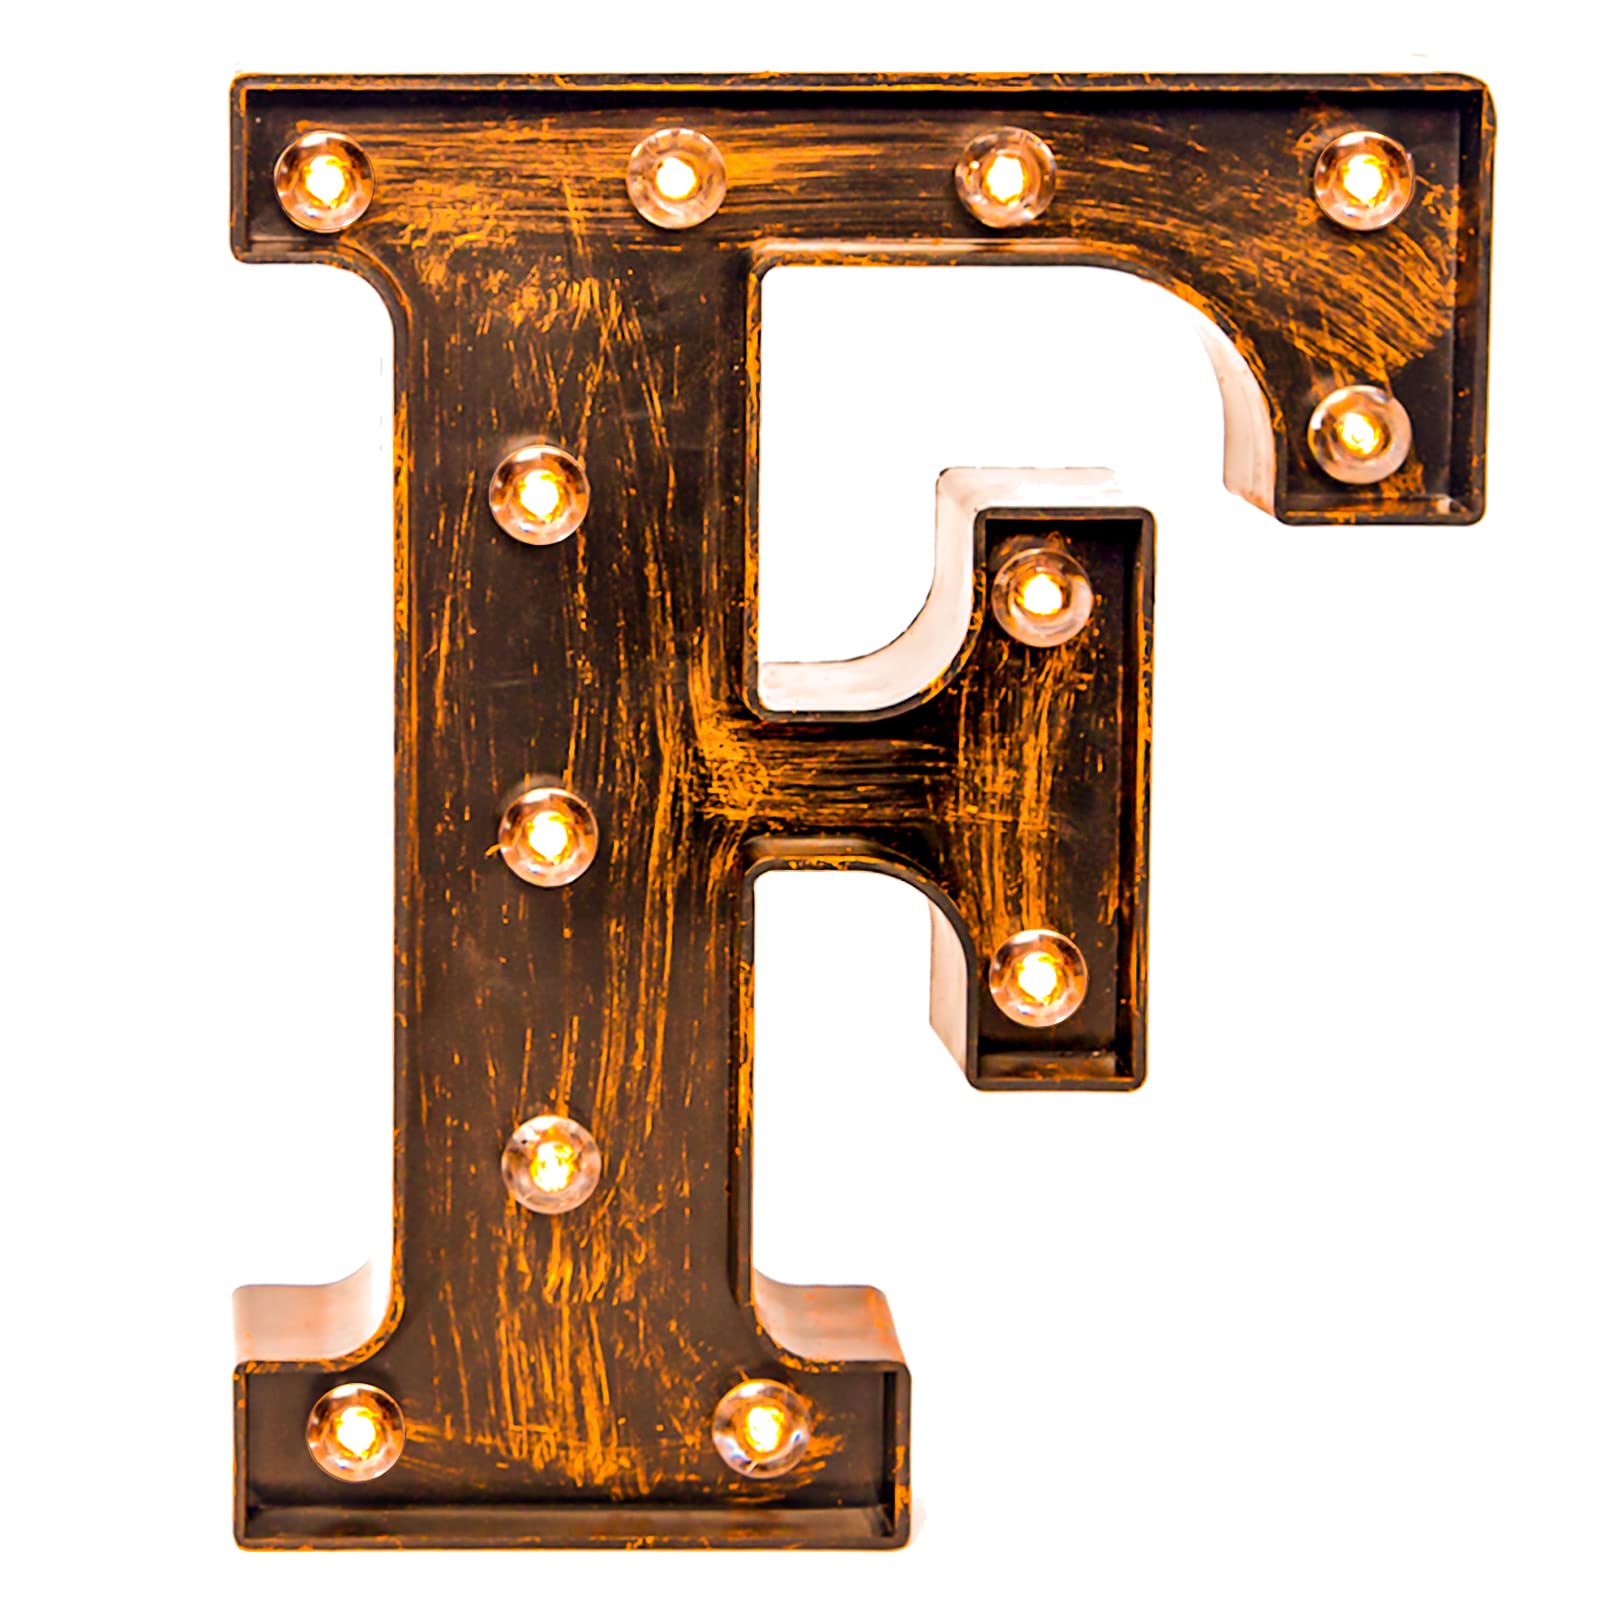 Glintee LED Marquee Letter Lights Vintage Style Light Up 26 Alphabet Letter Signs for Wedding Birthday Party christmas Home Bar cafe Ini